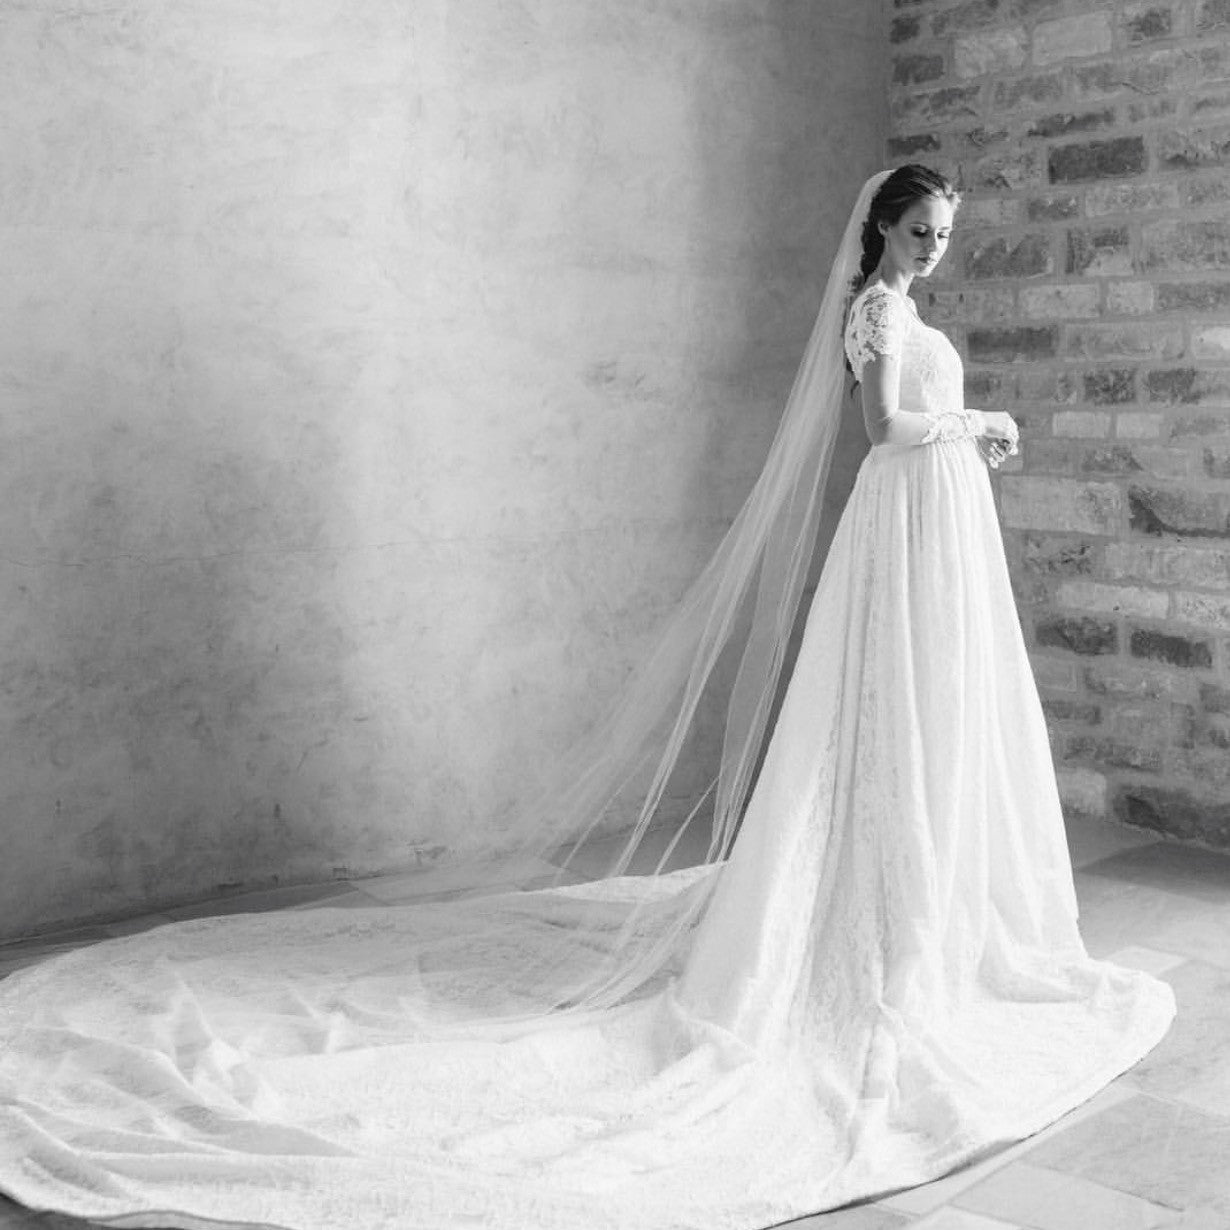 Bride Alyssa Campanella poses in her custom Lauren Elaine Bridal wedding dress with cathedral train and lace illusion sleeves at Sunstone Villa in Santa Ynez